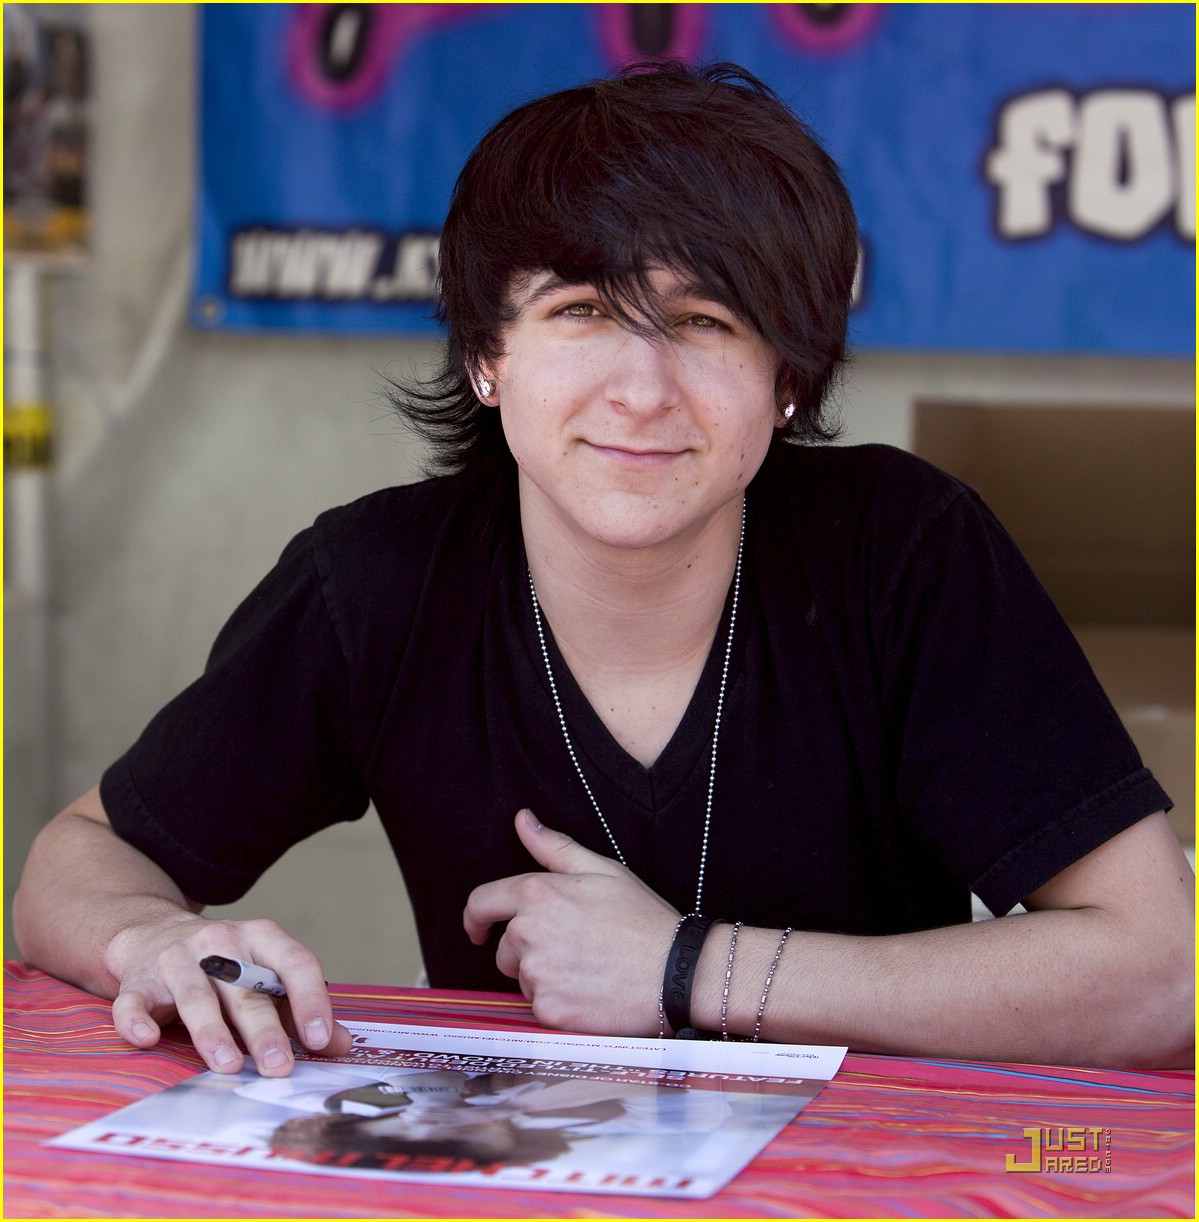 mitchel musso meaghan martin mix 07